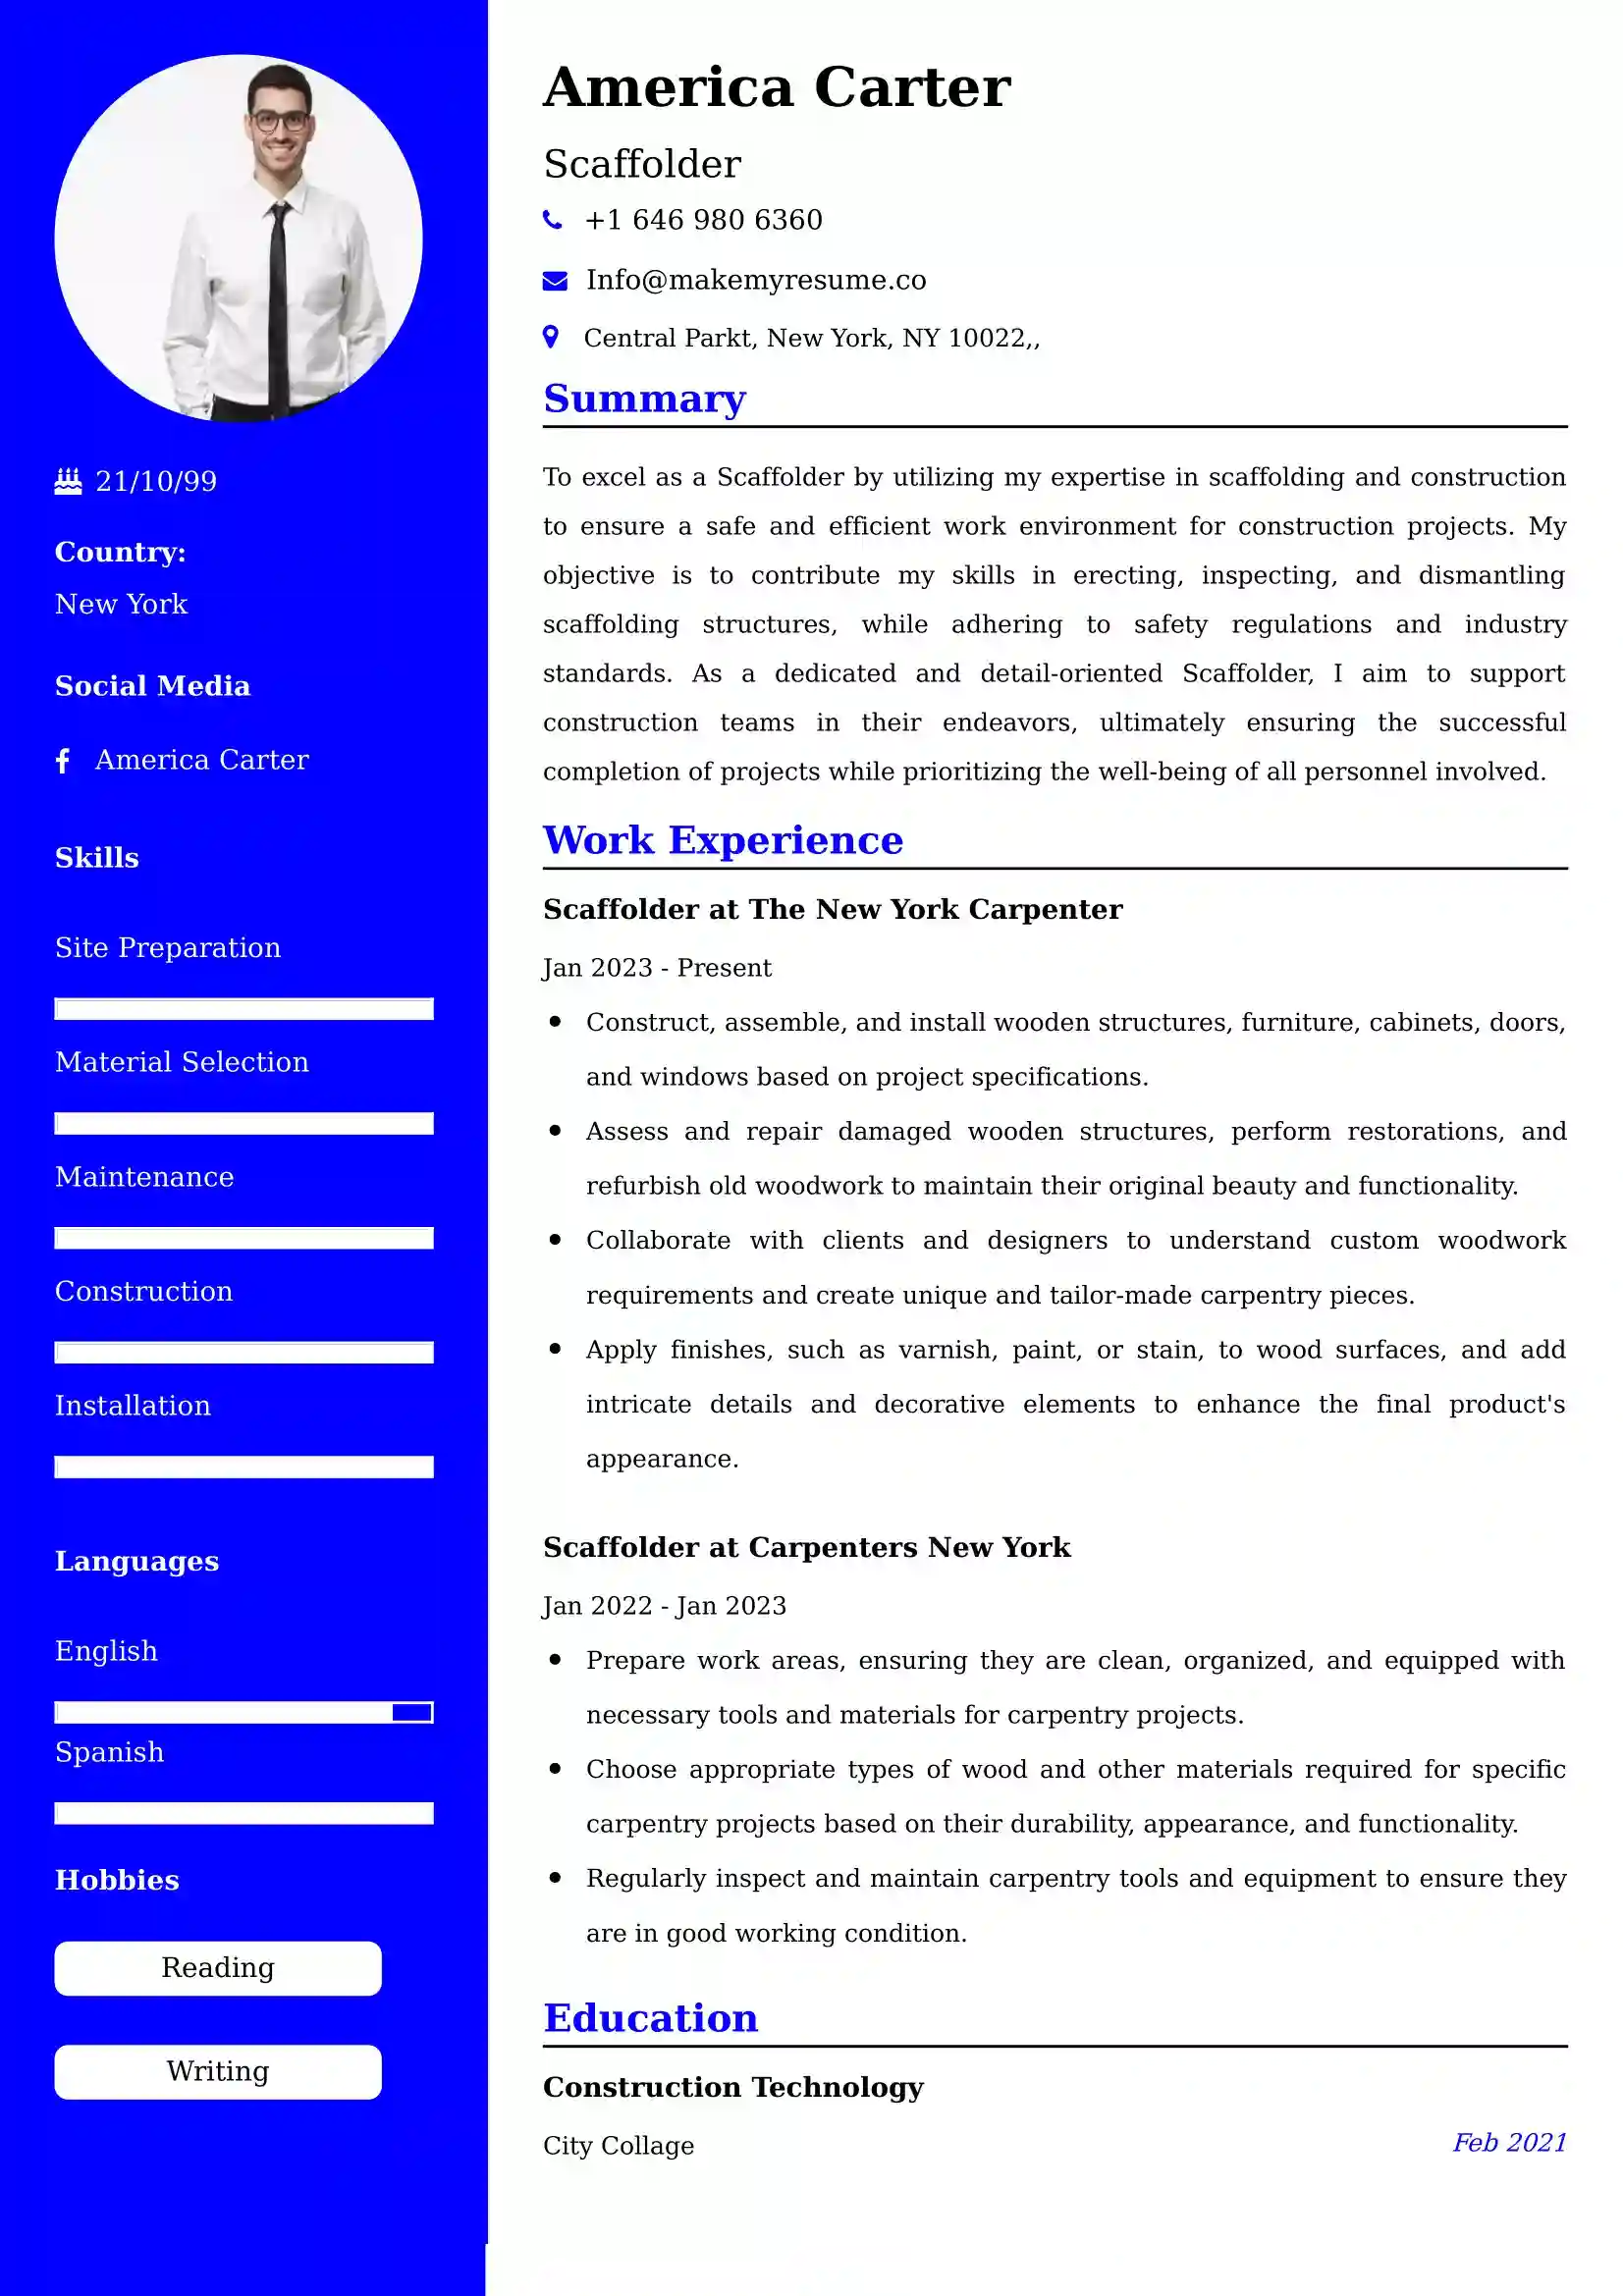 Scaffolder Resume Examples for UK Jobs - Tips and Guide